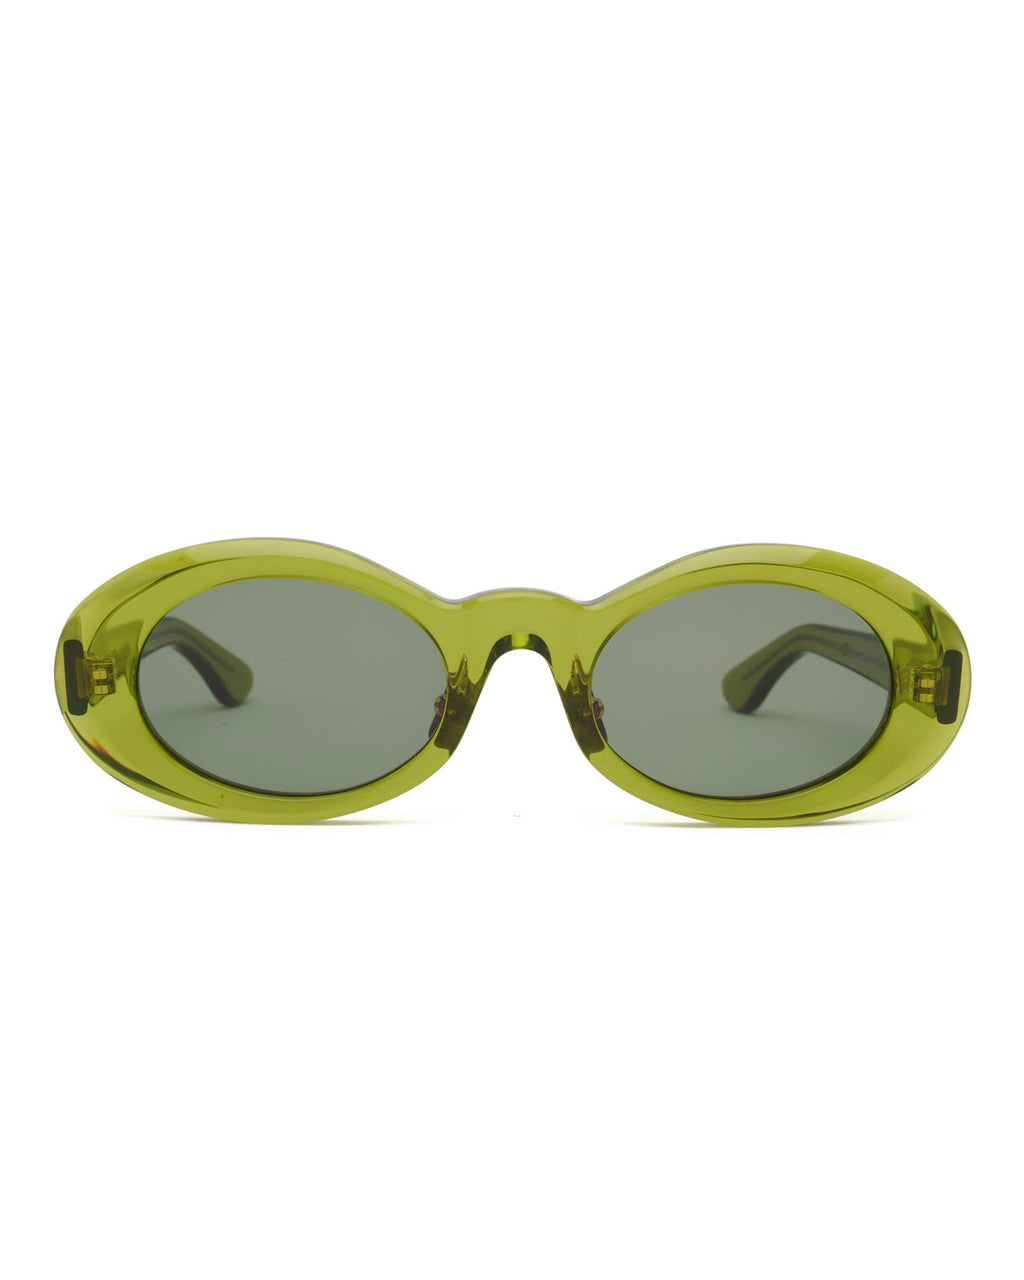 Oyster Sunglasses, Green